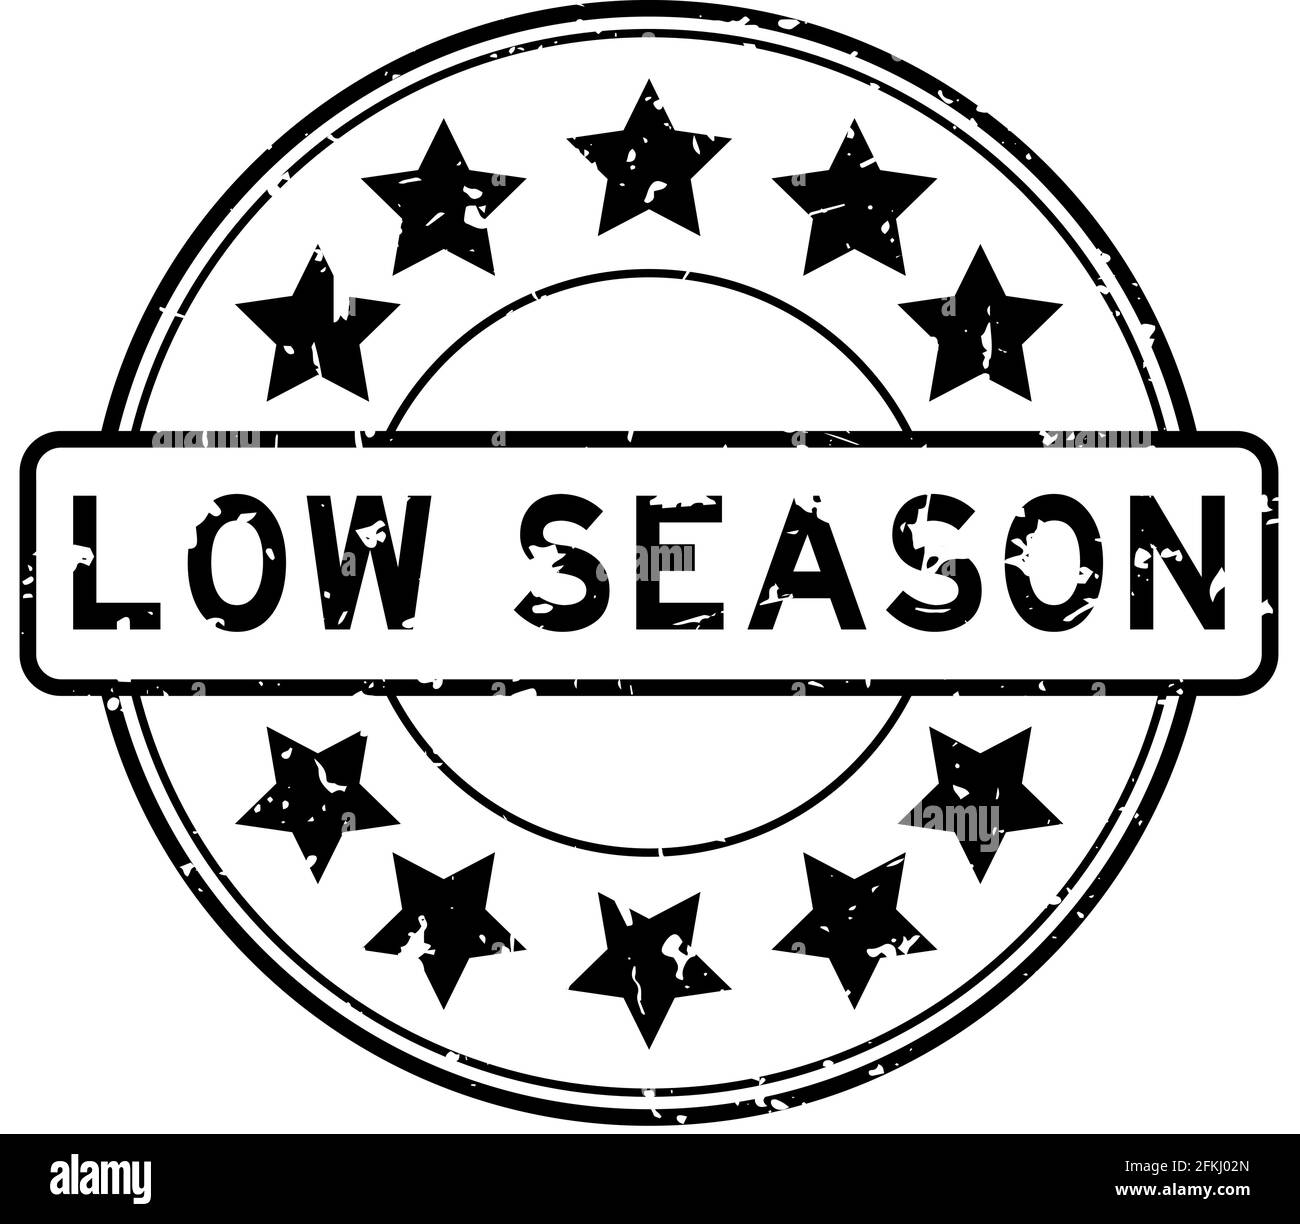 Grunge black low season word with star icon round rubber seal stamp on white background Stock Vector